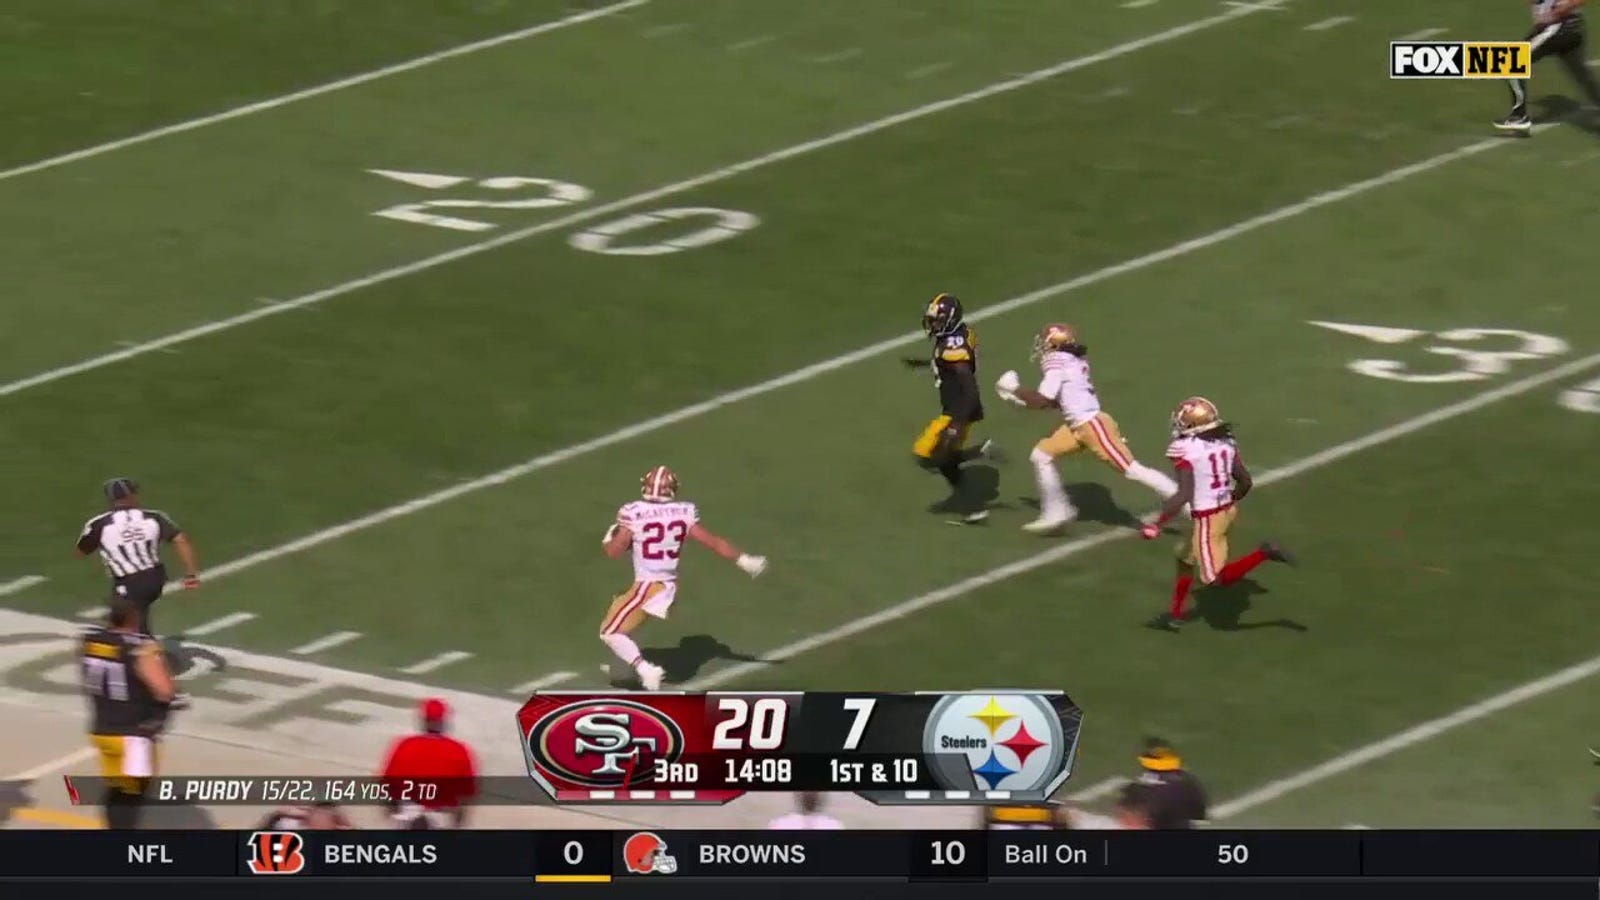 49ers' Christian McCaffrey SPINS his way into an AMAZING 65-yard rushing TD against Steelers